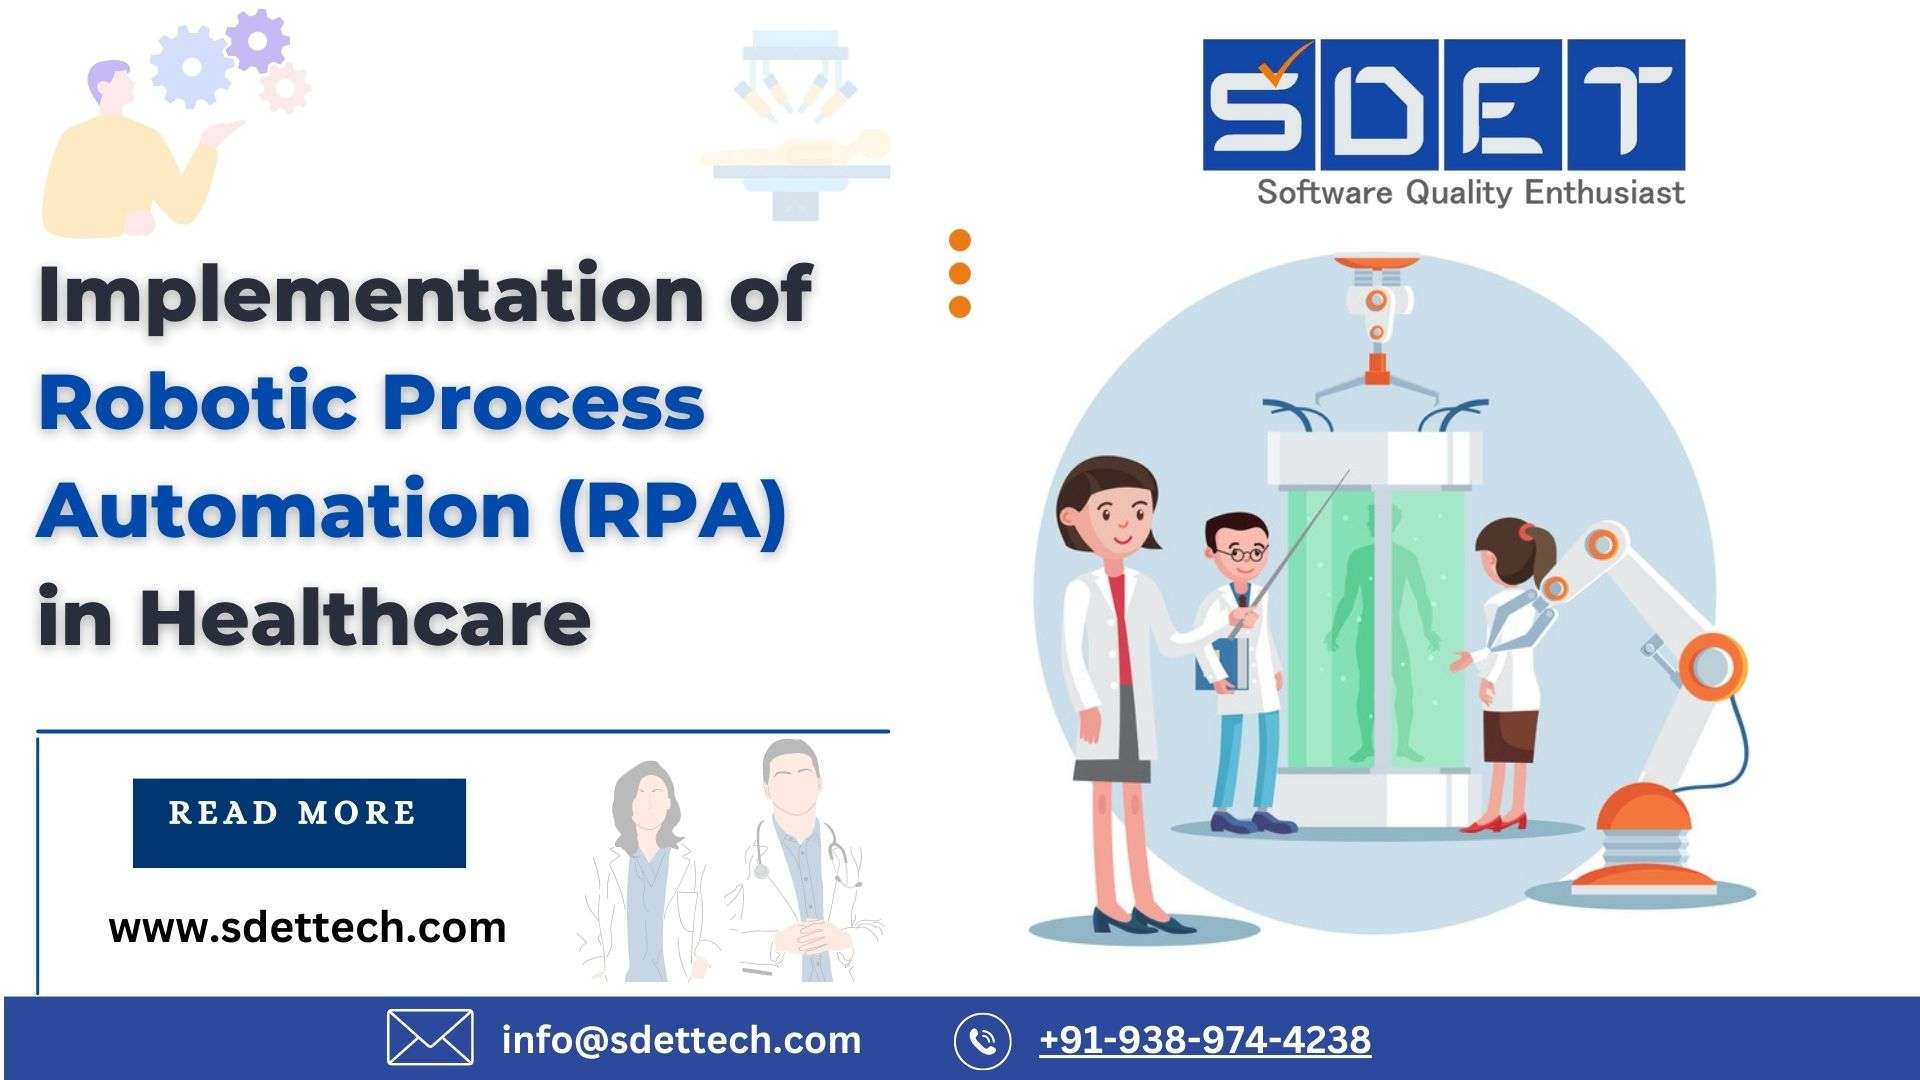 Implementation of Robotic Process Automation (RPA) in Healthcare image